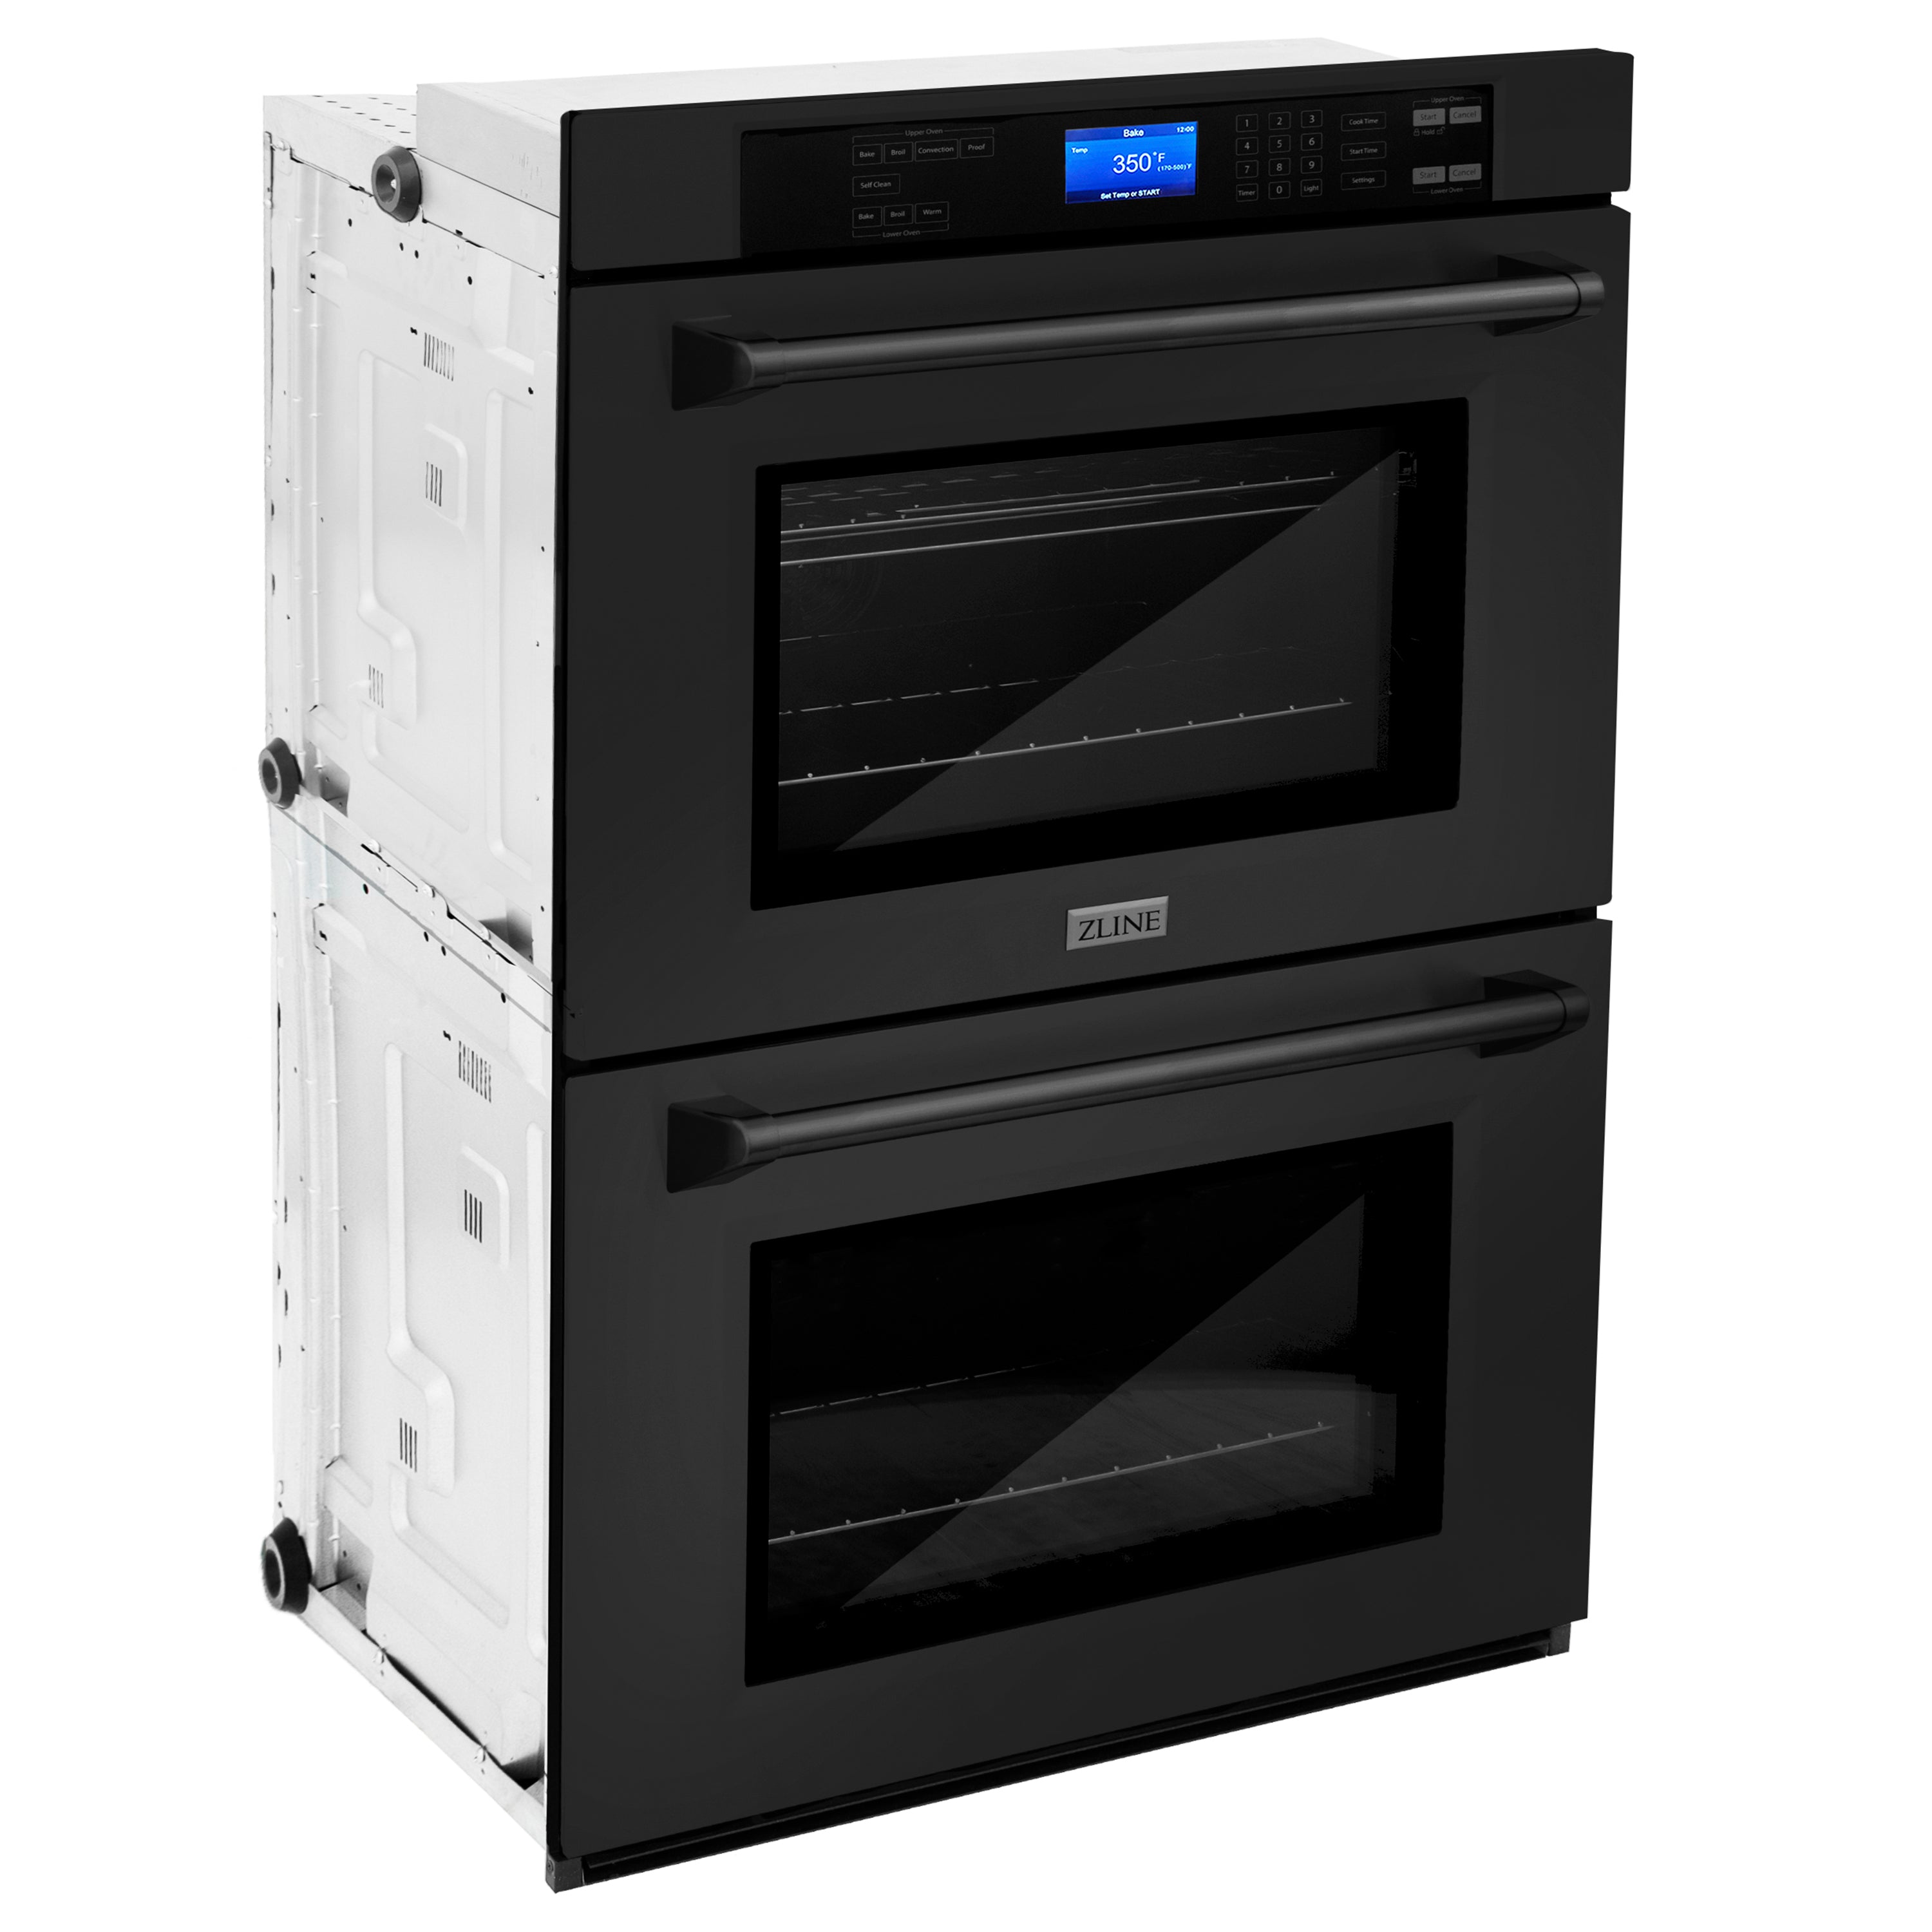 ZLINE 30" Professional Double Wall Oven with Self Clean and True Convection in Black Stainless Steel (AWD-30-BS)